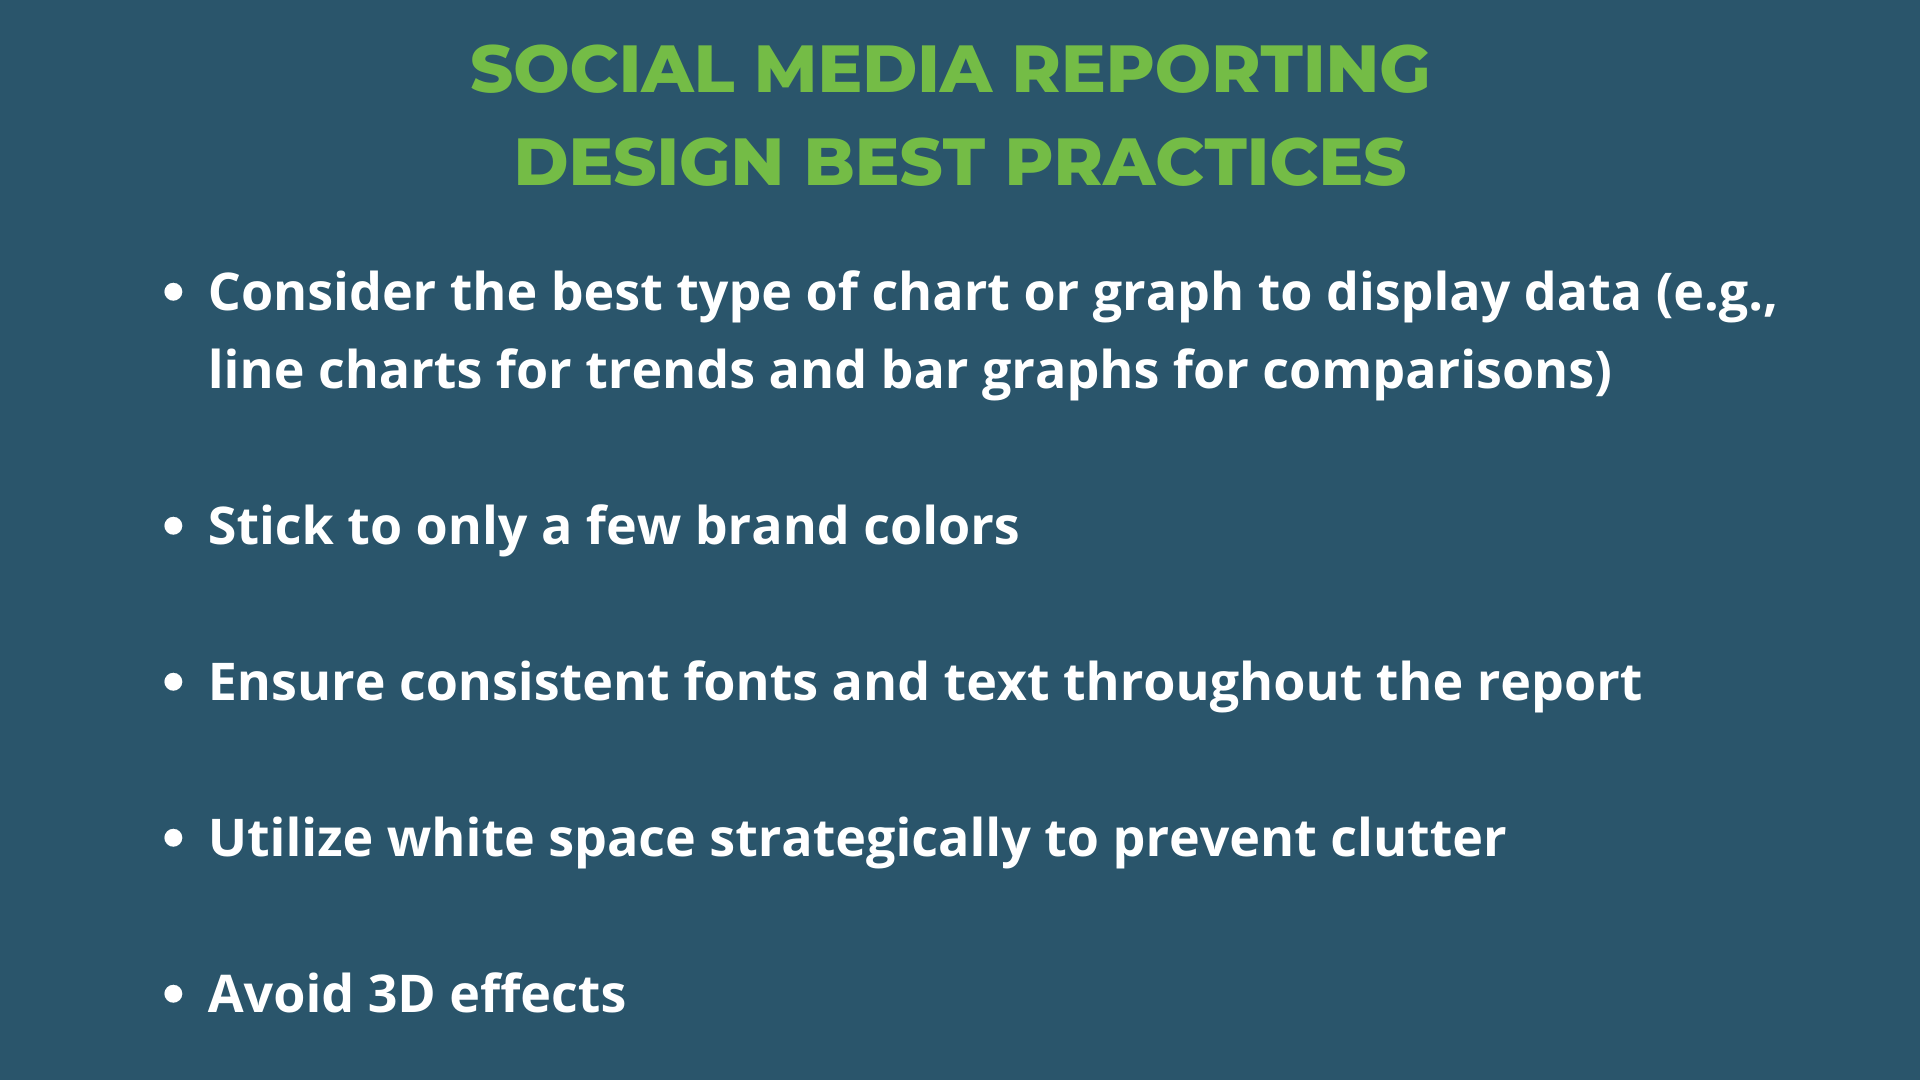 Dark blue background with a green heading and white bullet point text explaining social media reporting design best practices